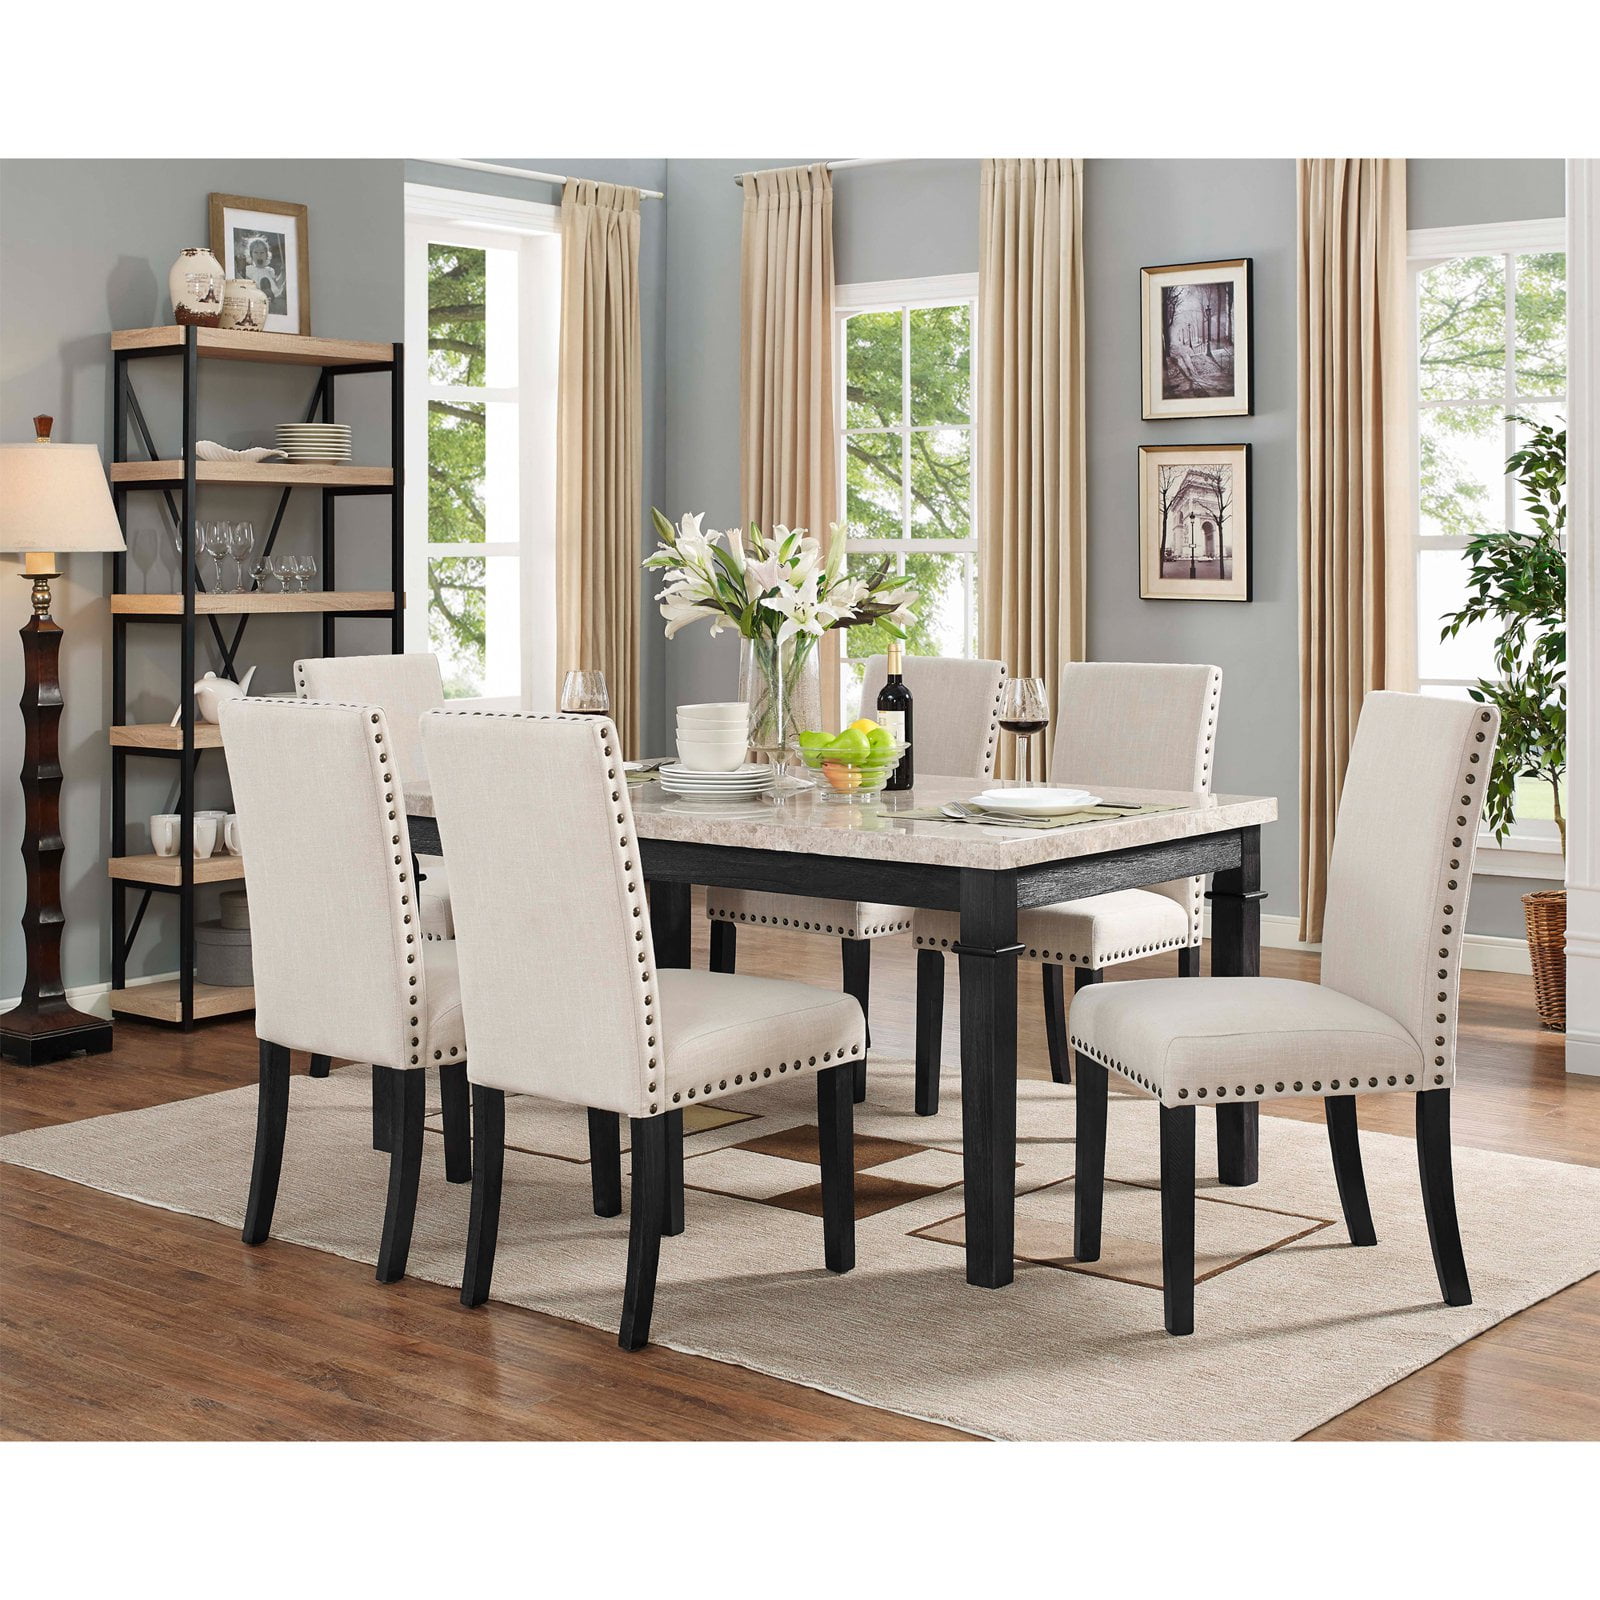 Picket House Furnishings Bradley 7 Piece Dining Table Set with